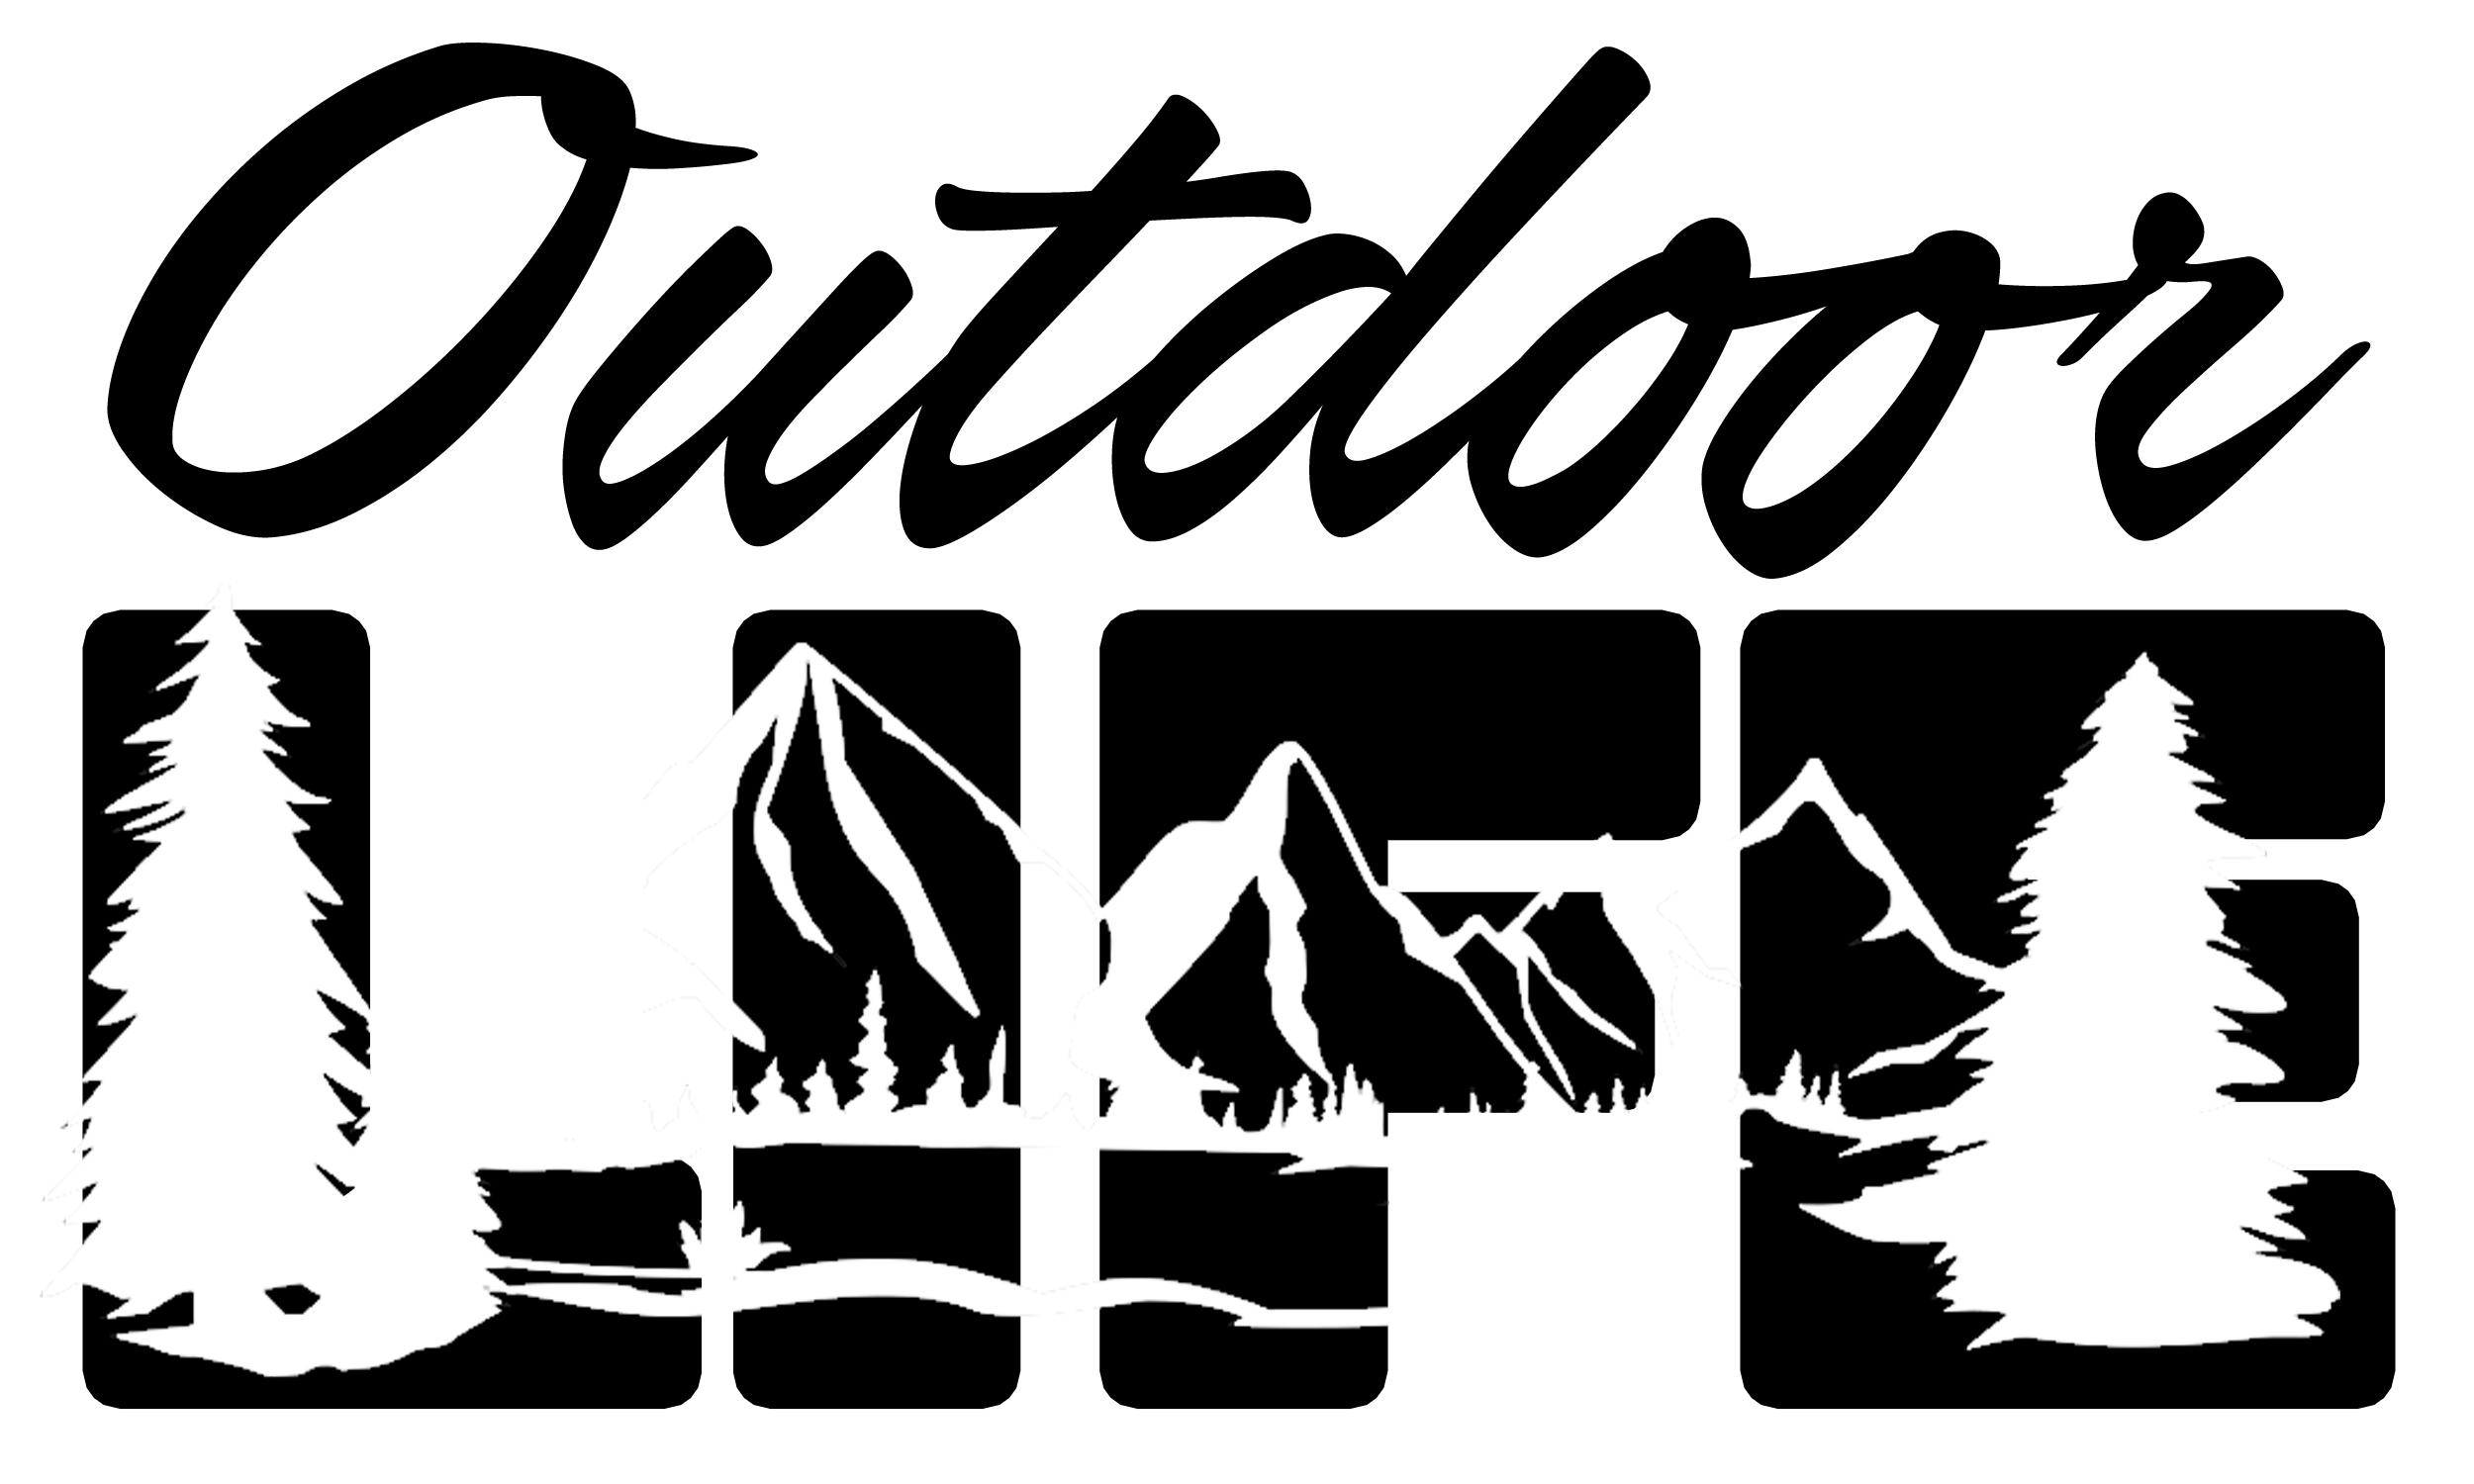 Free Outdoor Life SVG File